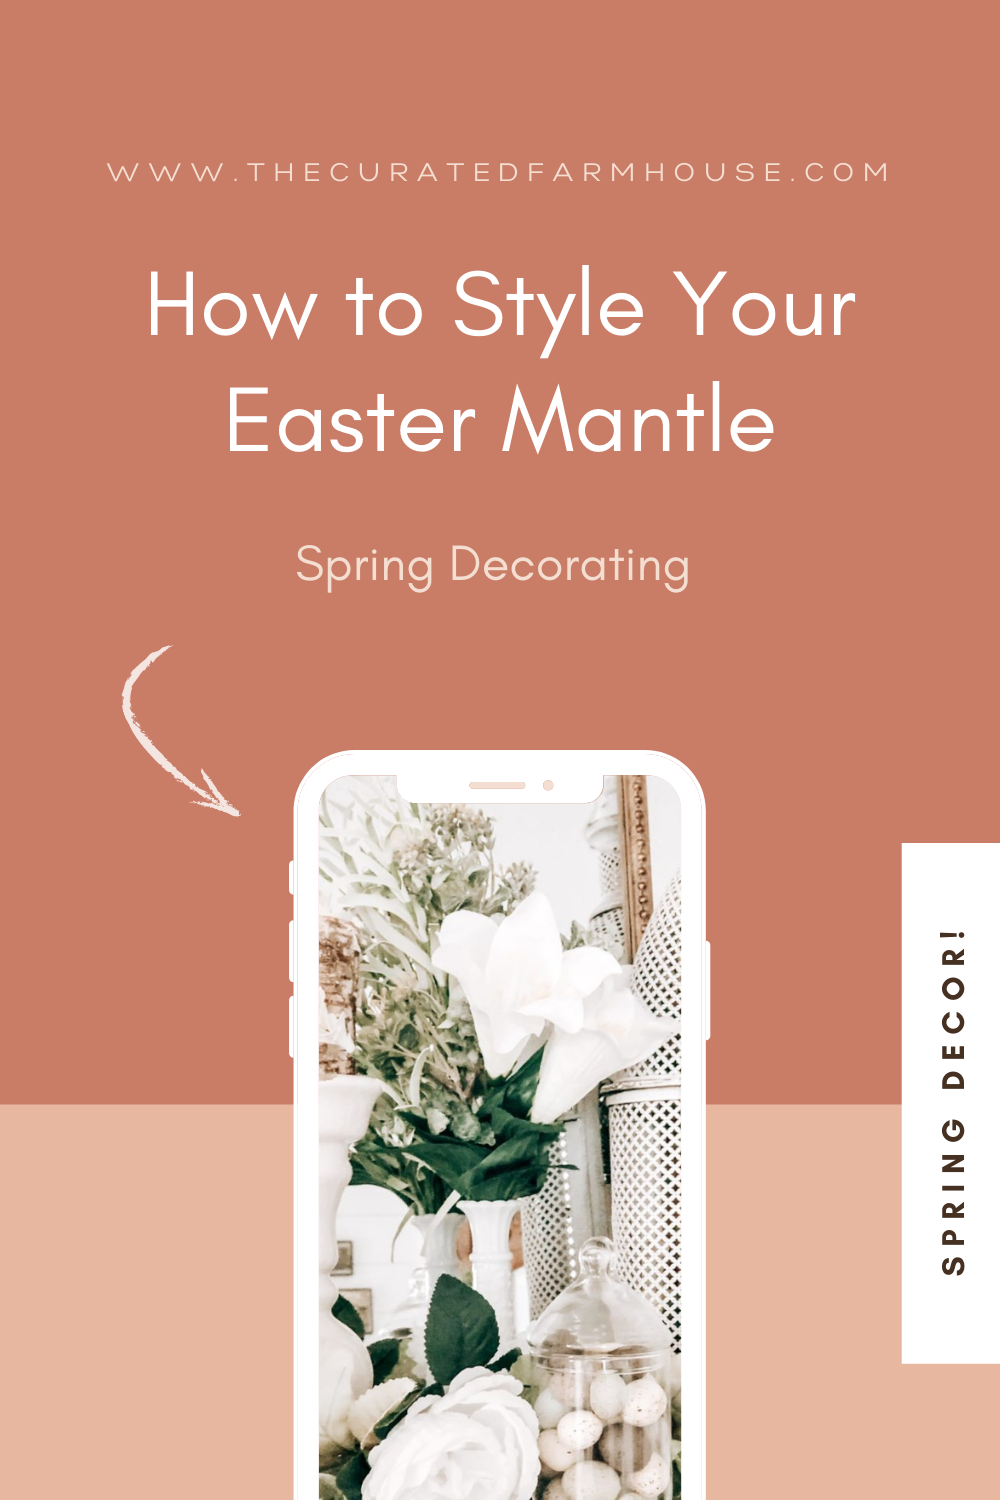 How to Style Your Easter Mantle